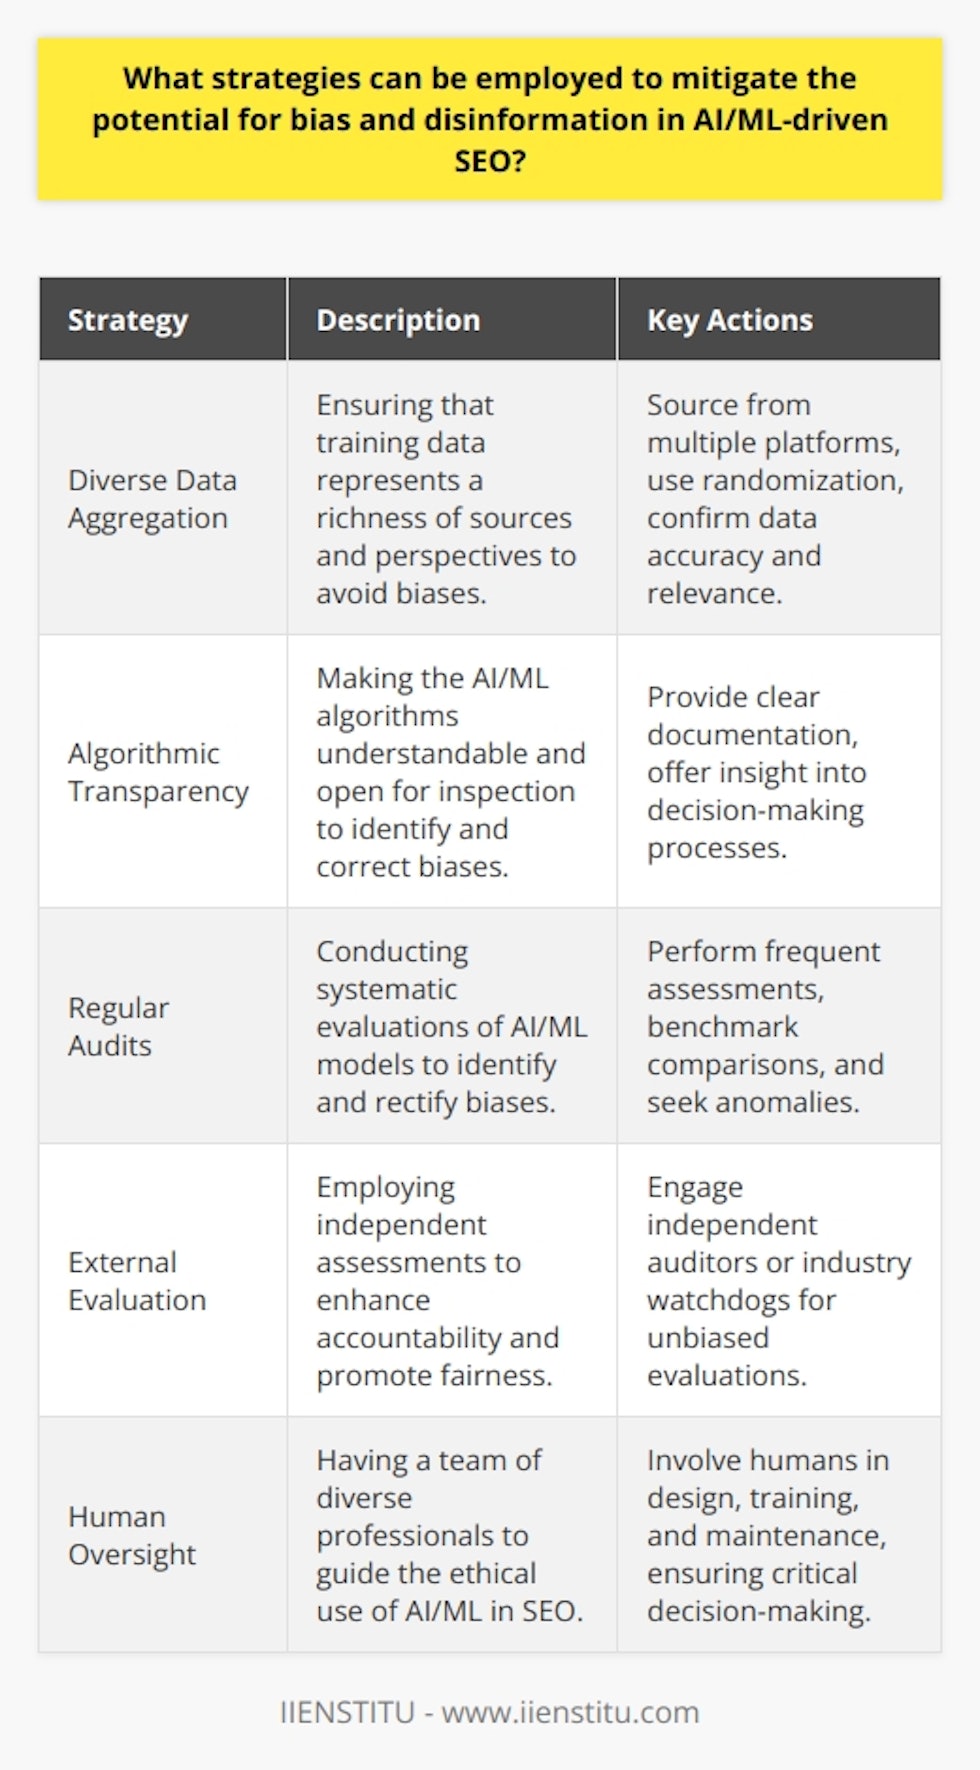 In the rapidly evolving landscape of AI/ML-driven SEO, it is an ongoing challenge to mitigate bias and the insertion of disinformation. To combat these issues and ensure the integrity and utility of search engine results, several strategic measures can be adopted.The primary effort must be centered on the data used for training AI/ML models. Every dataset must be rigorously scrutinized to confirm that it represents a rich diversity of sources and perspectives. To achieve this, data should be aggregated from an array of platforms, avoiding over-representation of any single demographic or ideological group. Randomization techniques can aid in producing a more representative sample that trains AI/ML models to recognize a broad spectrum of content as relevant and valuable. Ensuring data accuracy and relevance is crucial; outdated or inaccurate data can skew the results and embed unjust biases into the models.Transparency is a further cornerstone strategy. The algorithms that govern AI/ML-driven SEO must be both comprehensible and open to inspection. This transparency enables the recognition and correction of biases embedded within the models themselves. Clear documentation of the algorithm's logic helps tech professionals and stakeholders alike understand the decision-making process, fostering a more trust-based relationship with the technology.A third essential strategy is the implementation of robust and regular audits. Systematic assessments of AI/ML algorithms ensure that they do not propagate or even exacerbate existing biases. These audits should be conducted frequently and involve comparison against a set of benchmark results, seeking out anomalies in performance and outputs. Through this ongoing scrutiny, issues can be identified swiftly and corrective measures enacted.In addition to internal measures, engaging external checks, such as assessments by independent auditors or industry watchdogs, can promote accountability. They can offer unbiased perspectives on an algorithm's fairness and accuracy, serving as a valuable counterbalance to any potential internal oversight.Importantly, the human element must not be sidelined. Human oversight ensures that an ethical compass guides AI/ML-driven SEO. Teams of diverse SEO professionals should be involved in the design, training, and maintenance of AI/ML models, leveraging their cognitive capacities for critical decision-making where algorithms might fall short.AI/ML-driven SEO, once imbued with checks and balances informed by these strategies, stands a strong chance of delivering unbiased and truthful content to users, safeguarding the informational ecosystem from the erosion of trust that bias and disinformation can cause. By meticulously verifying data sources, ensuring algorithmic transparency, conducting ongoing audits, and preserving the invaluable role of human judgment, AI/ML-driven SEO can maintain its course as a reliable navigator in the vast sea of online content.